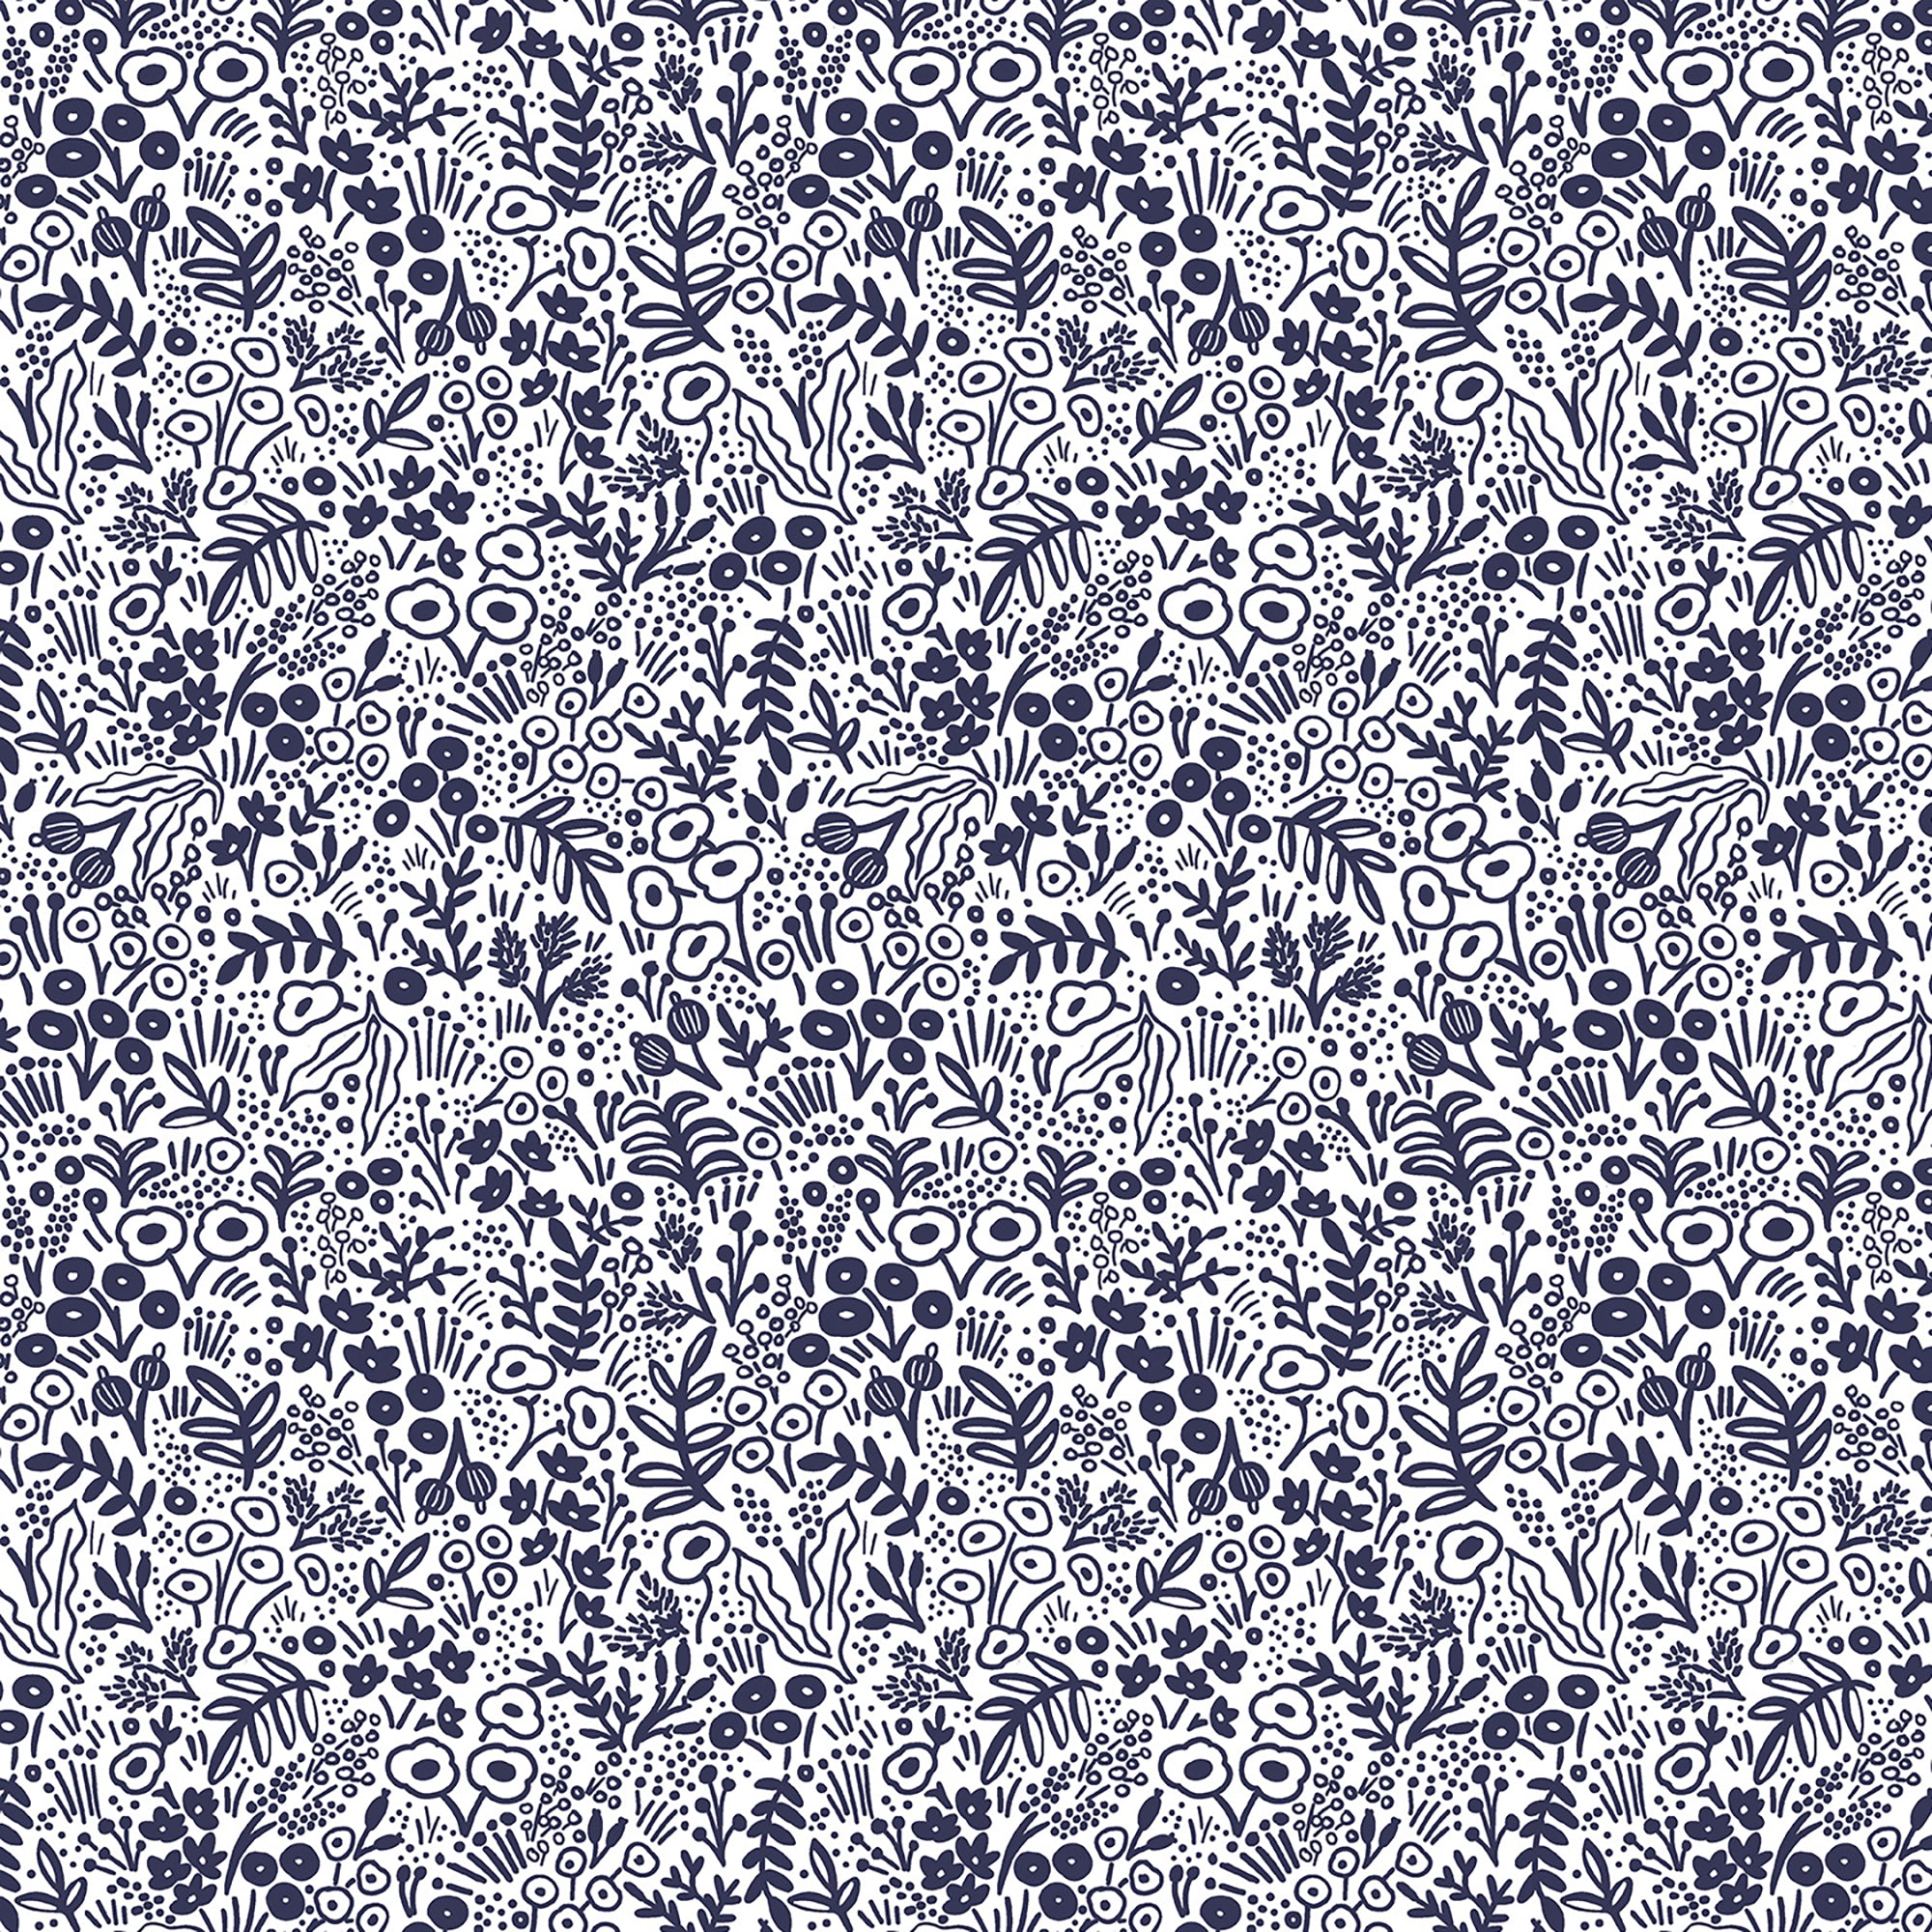 Rifle Paper Co. Basics - Tapestry Lace Navy